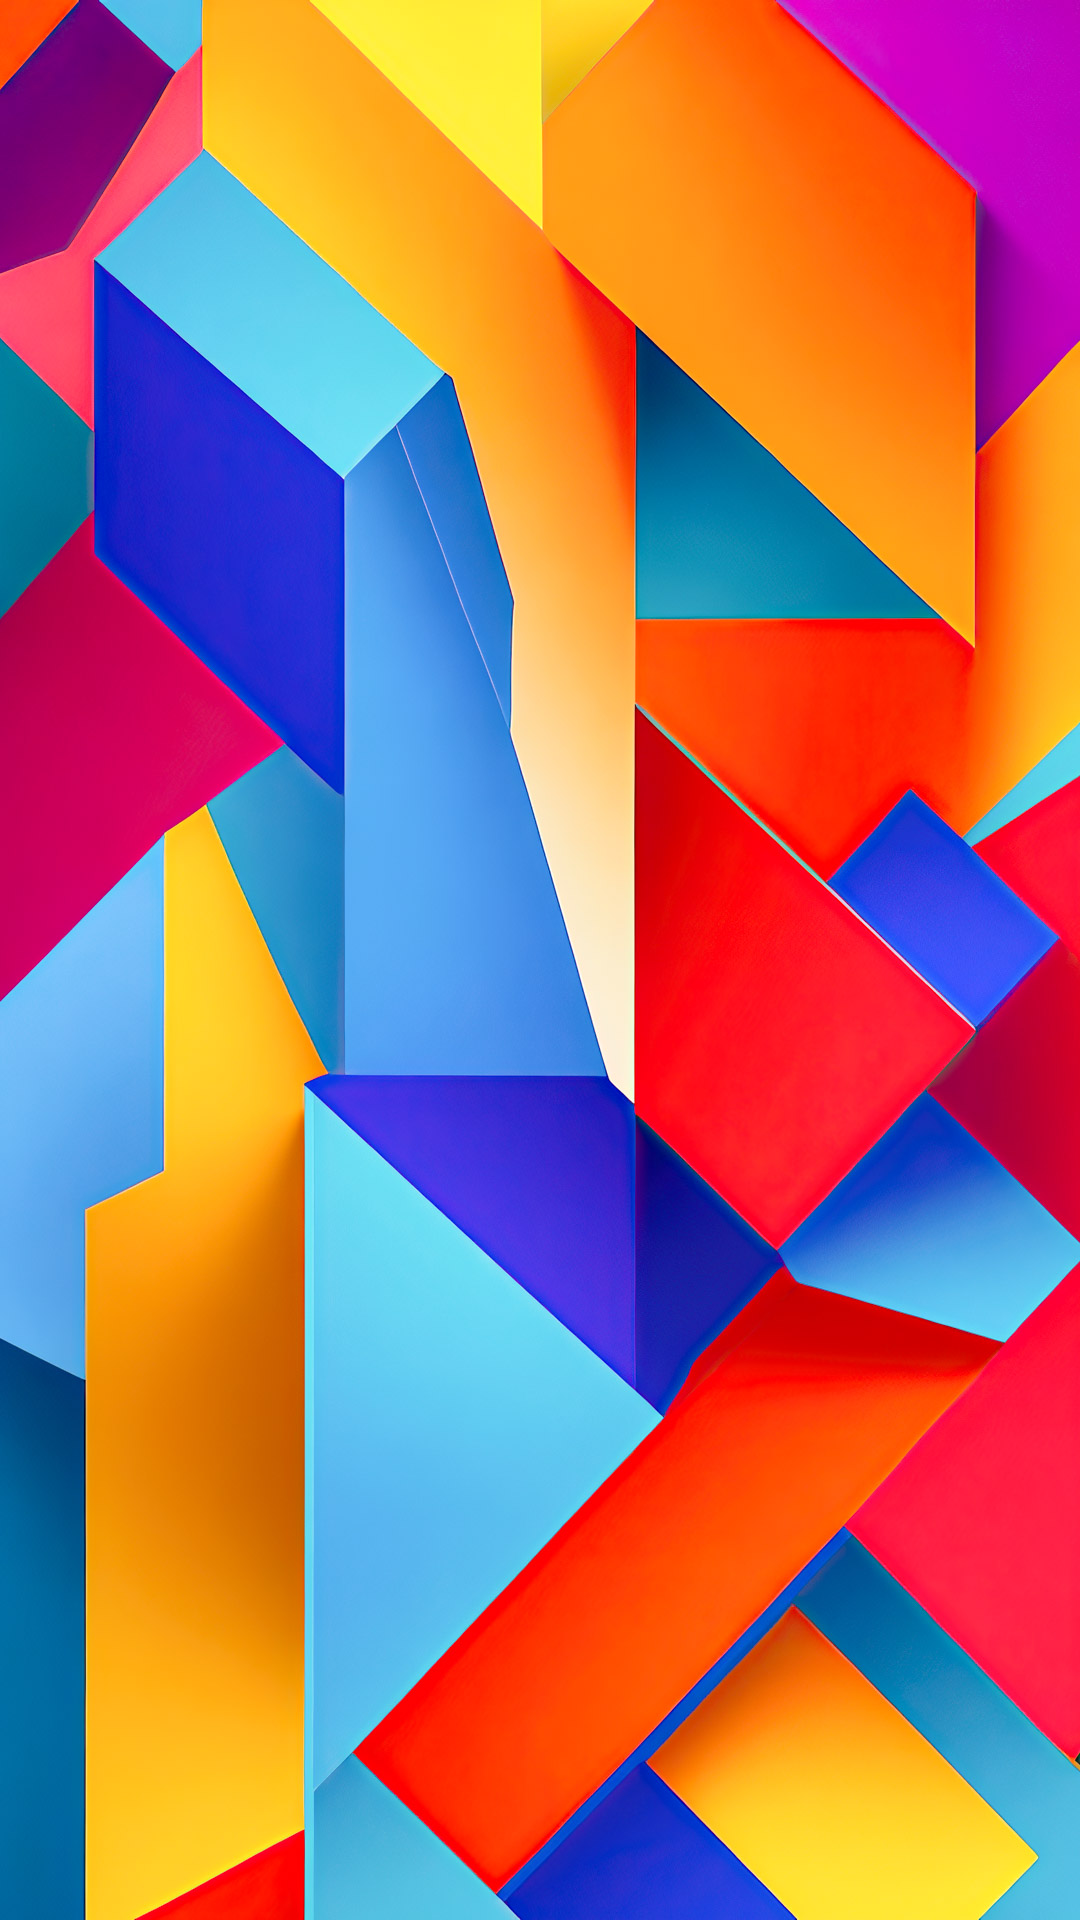 Immerse your phone screen in vibrant visuals with simple, colorful geometric shapes on a colorful background in our HD abstract wallpapers.